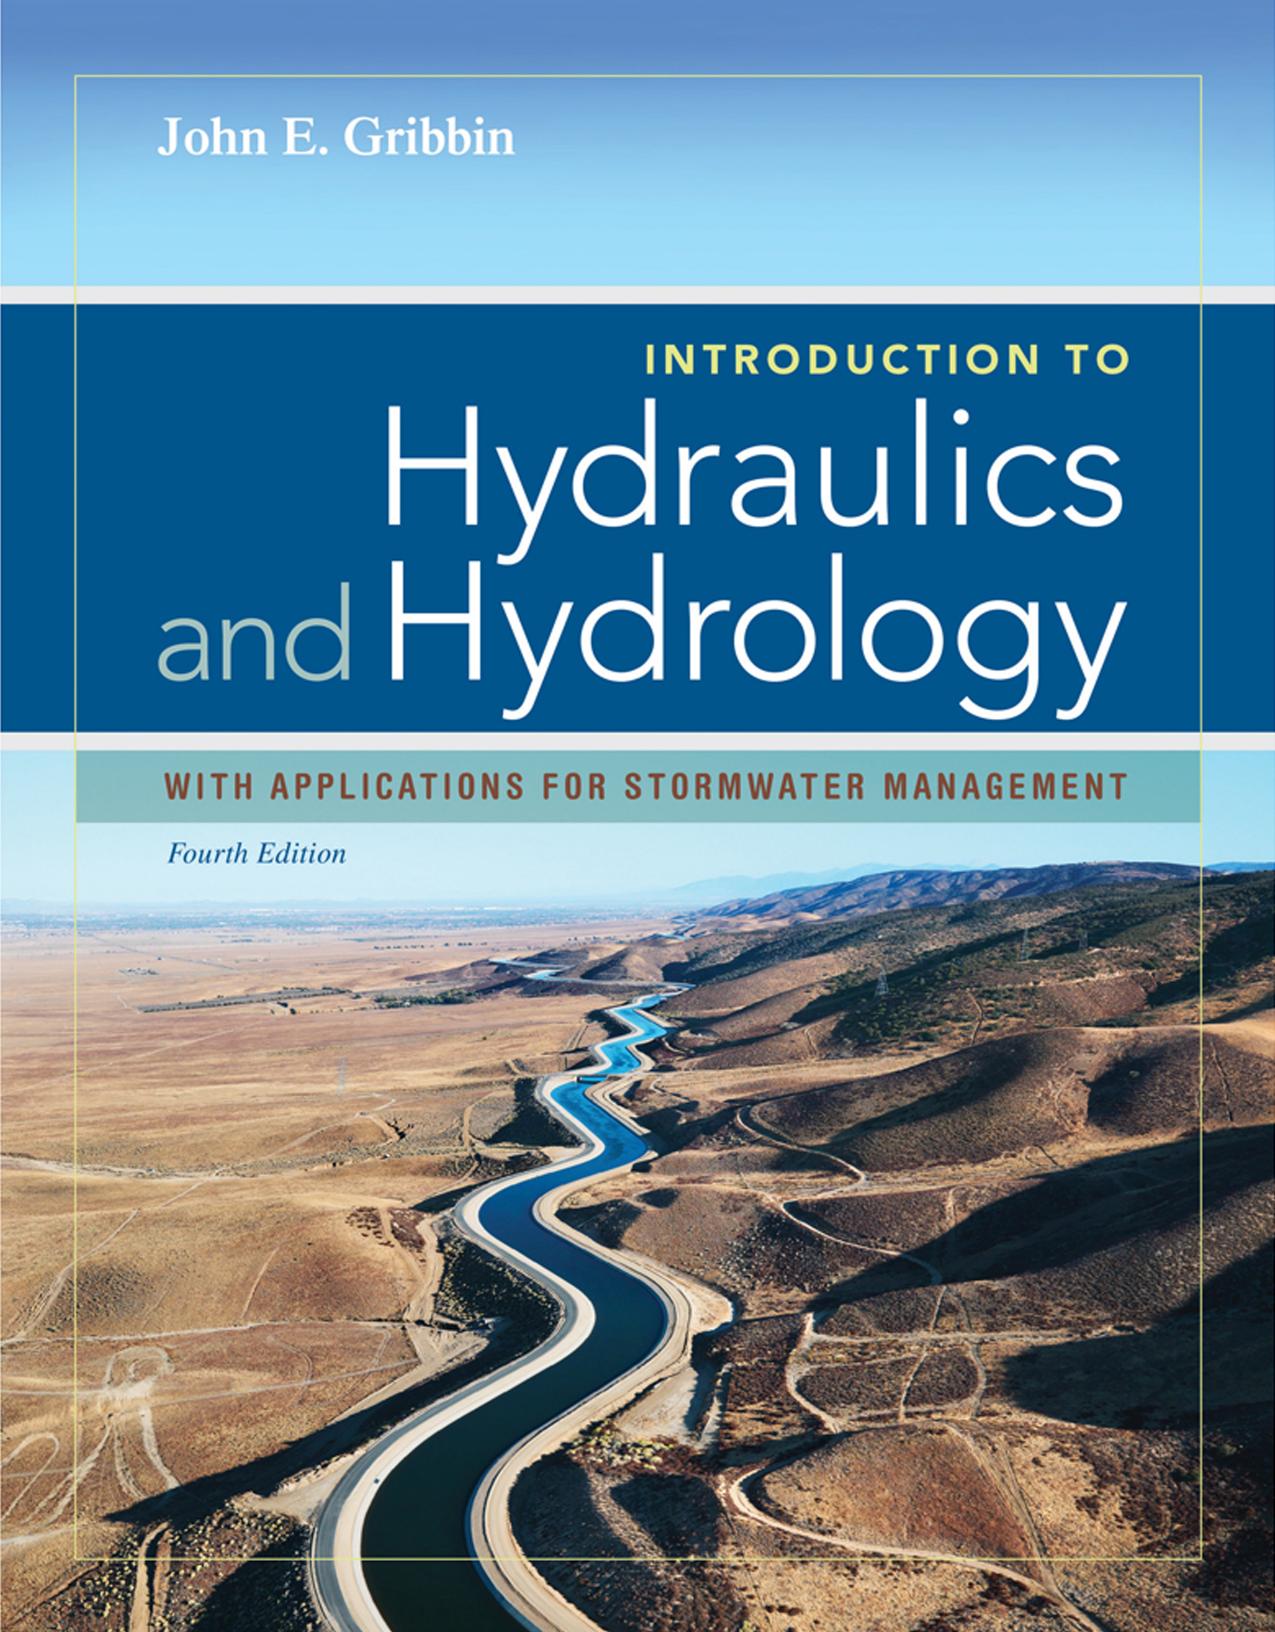 Introduction to Hydraulics & Hydrology, 4th ed.